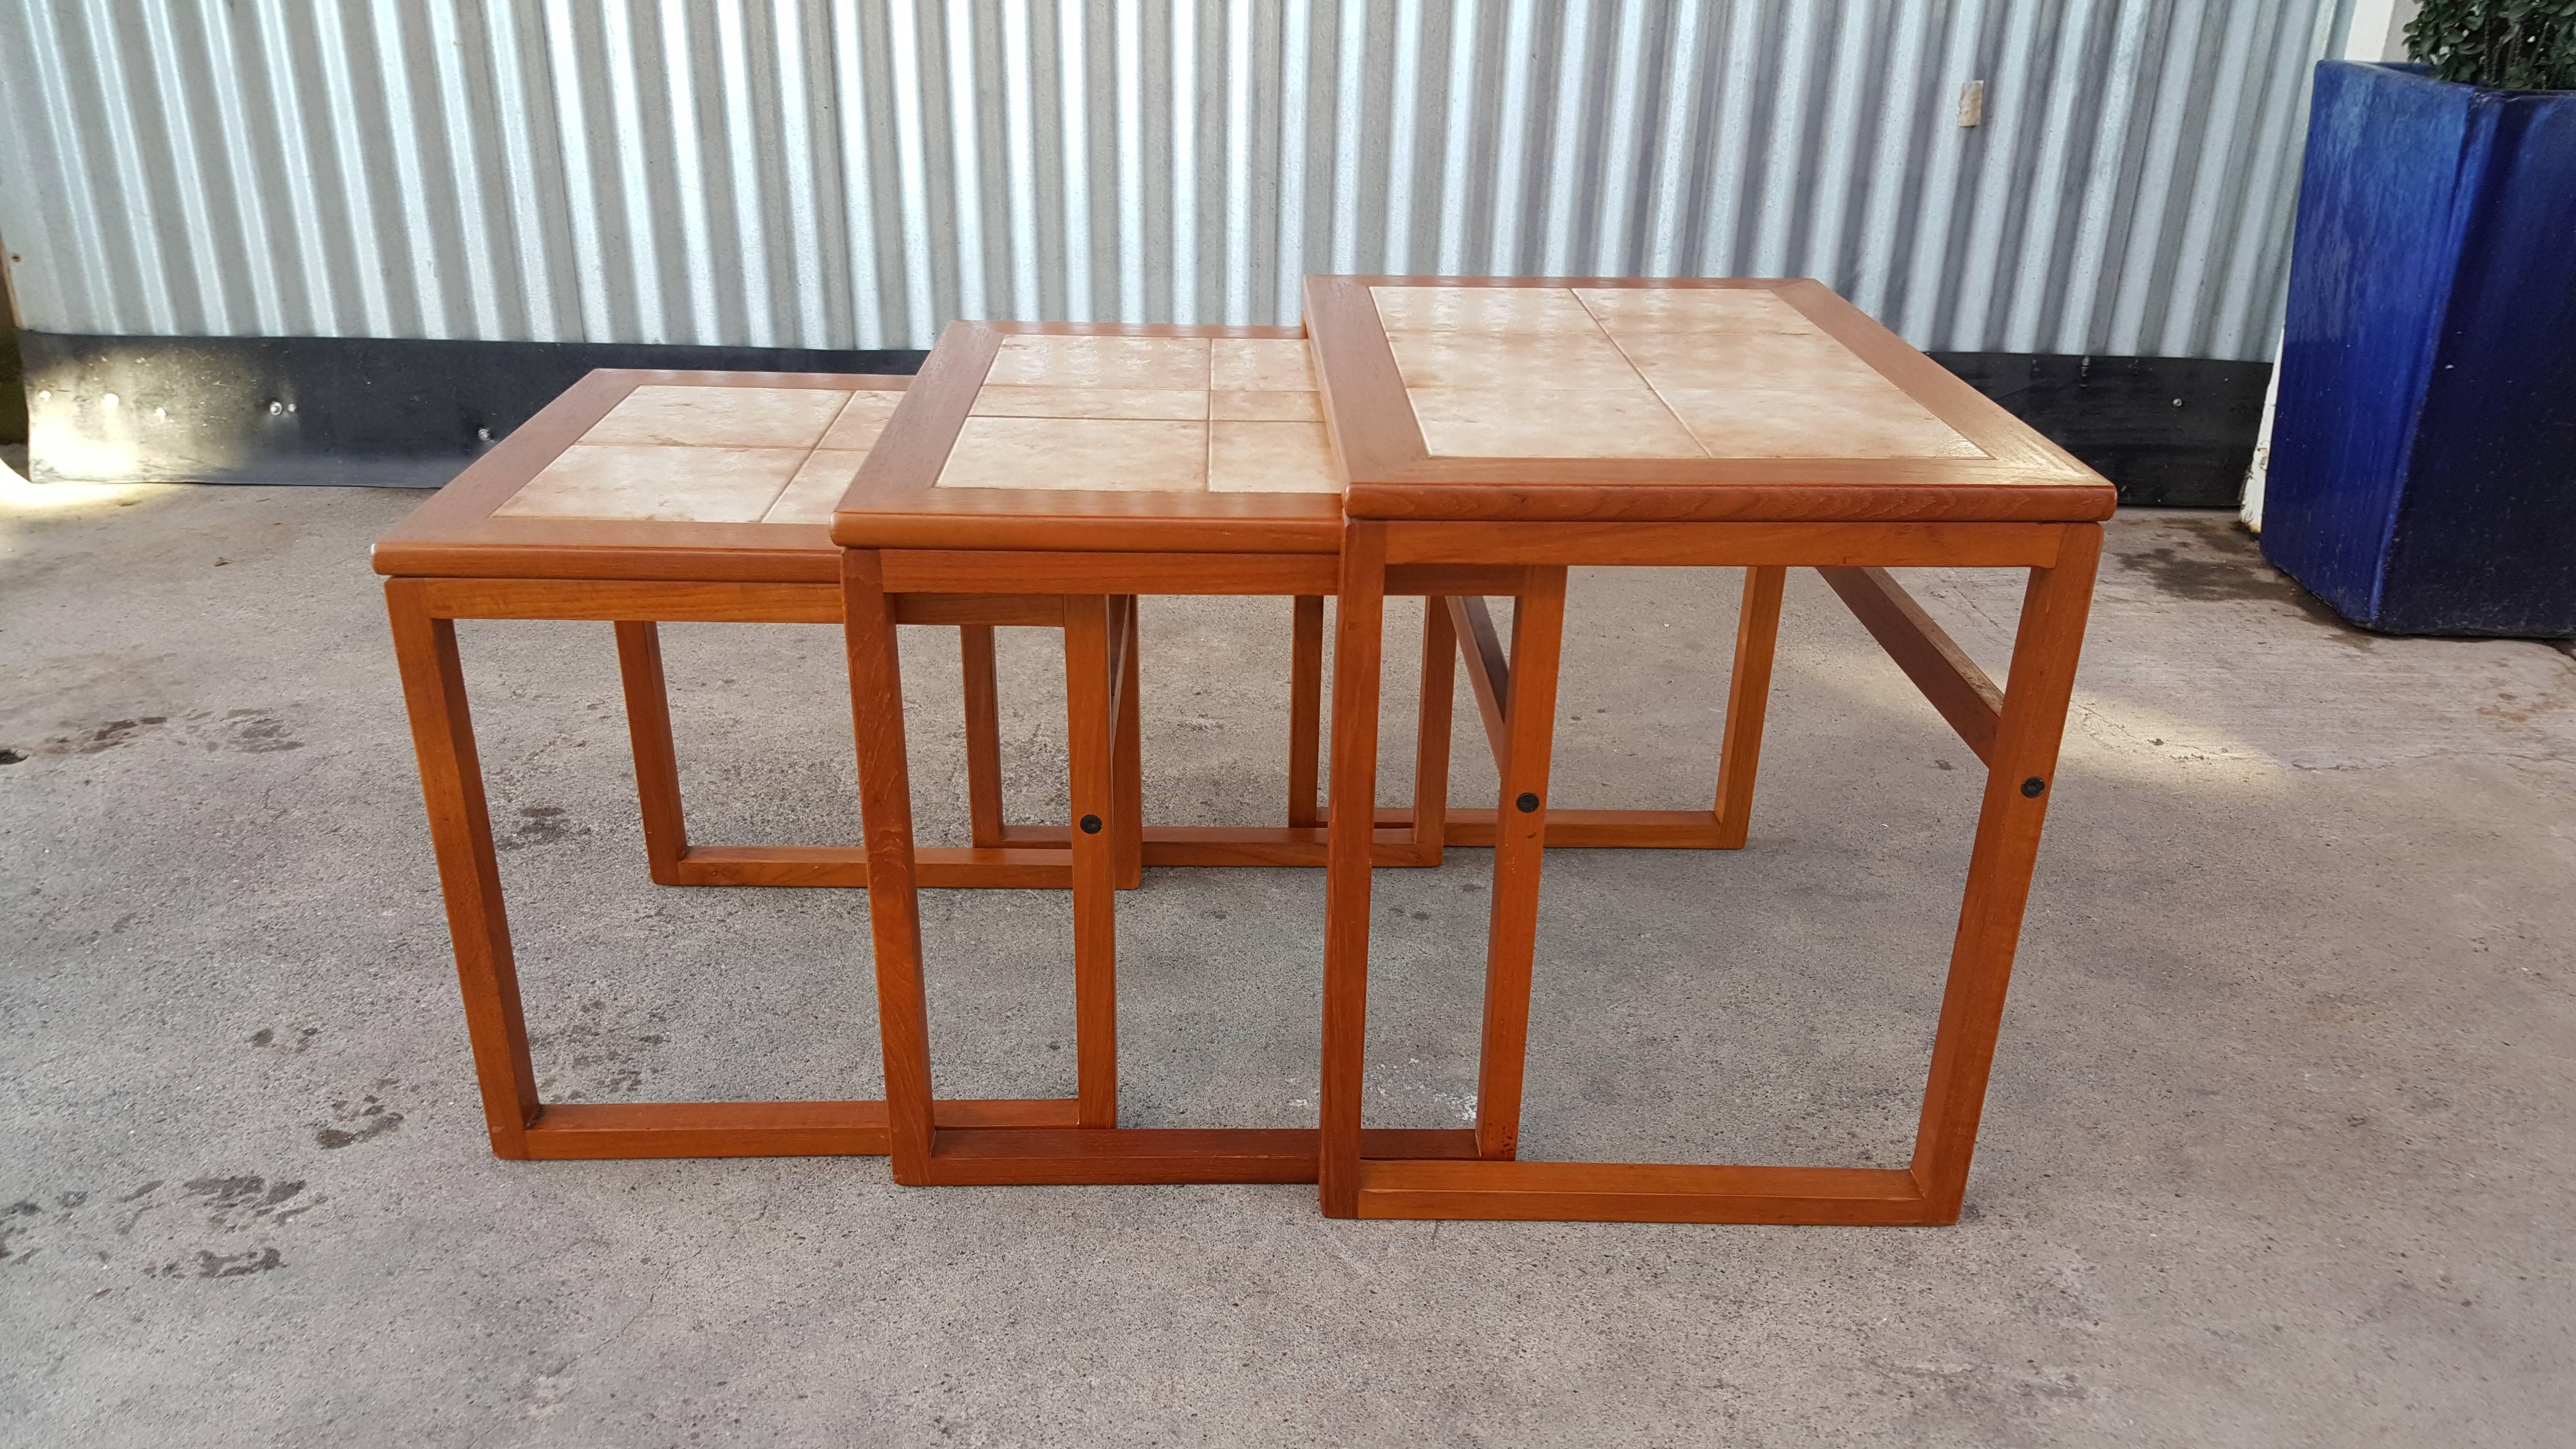 A set of three teak end tables with ceramic tile tops. May nest together to conserve space or be enjoyed as three separate end tables. Smaller tables measure 17.5